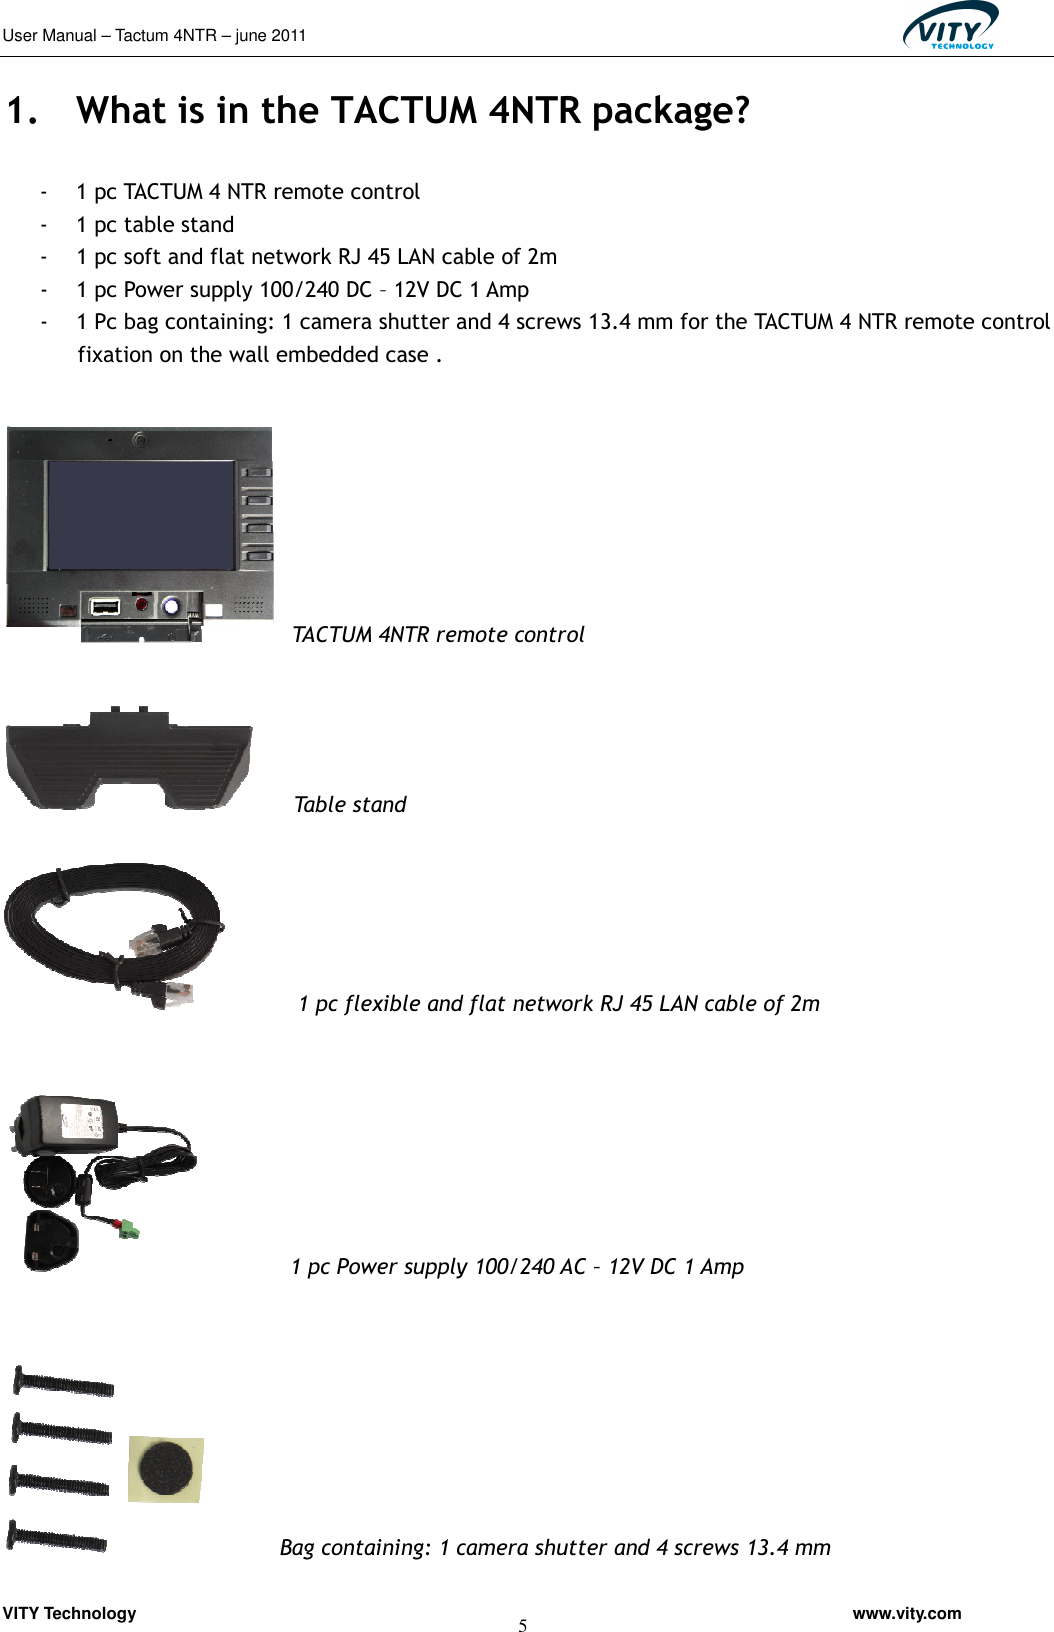 User Manual – Tactum 4NTR – june 2011                                                  VITY Technology                                                         www.vity.com  5 1. What is in the TACTUM 4NTR package?  - 1 pc TACTUM 4 NTR remote control - 1 pc table stand - 1 pc soft and flat network RJ 45 LAN cable of 2m - 1 pc Power supply 100/240 DC – 12V DC 1 Amp - 1 Pc bag containing: 1 camera shutter and 4 screws 13.4 mm for the TACTUM 4 NTR remote control fixation on the wall embedded case .    TACTUM 4NTR remote control        Table stand    1 pc flexible and flat network RJ 45 LAN cable of 2m                 1 pc Power supply 100/240 AC – 12V DC 1 Amp              Bag containing: 1 camera shutter and 4 screws 13.4 mm 